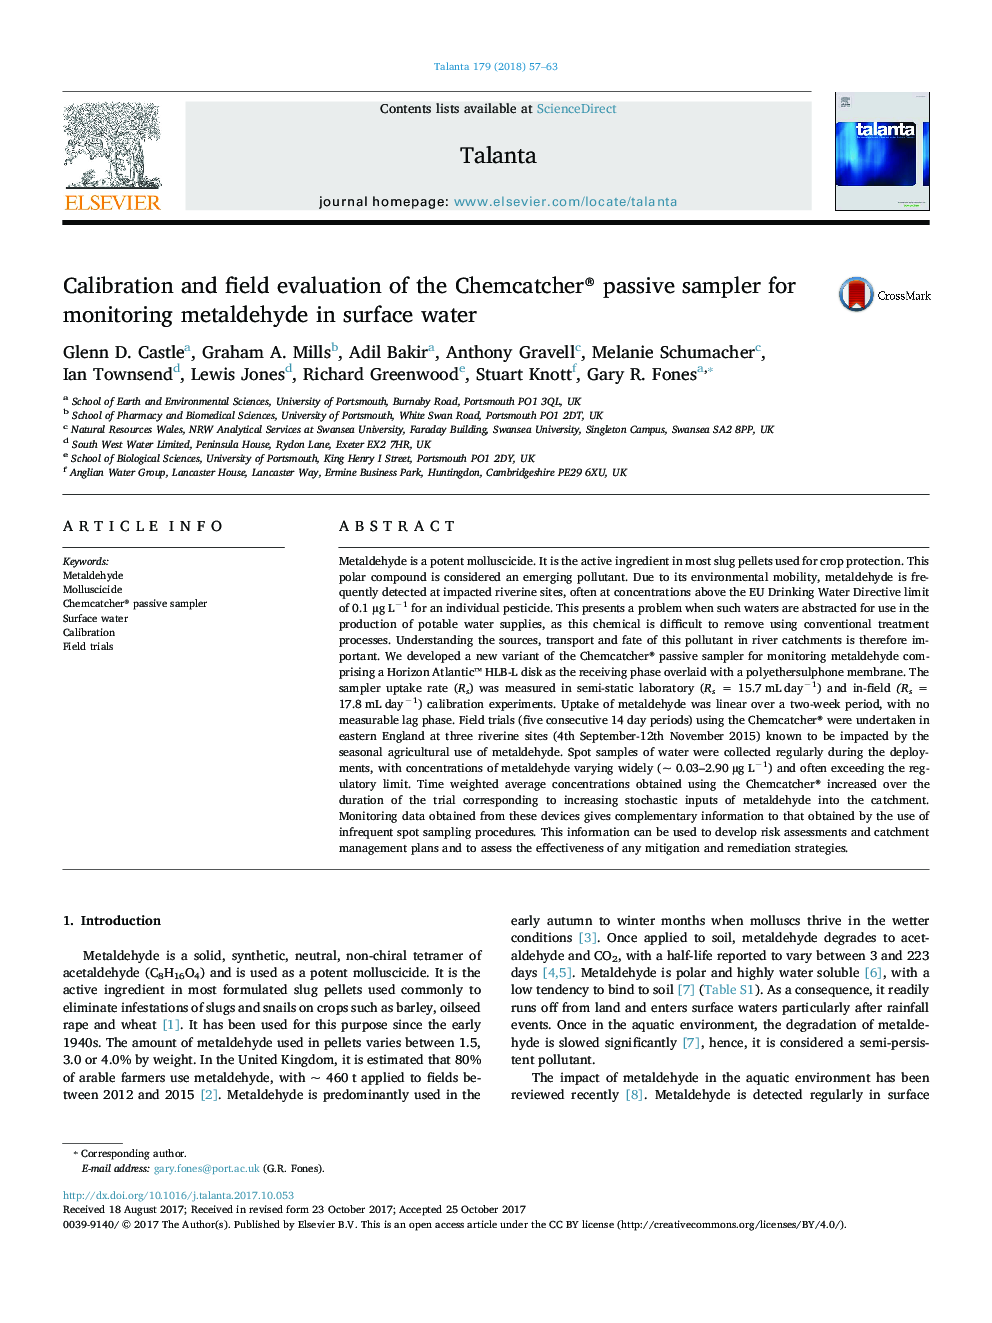 Calibration and field evaluation of the Chemcatcher® passive sampler for monitoring metaldehyde in surface water